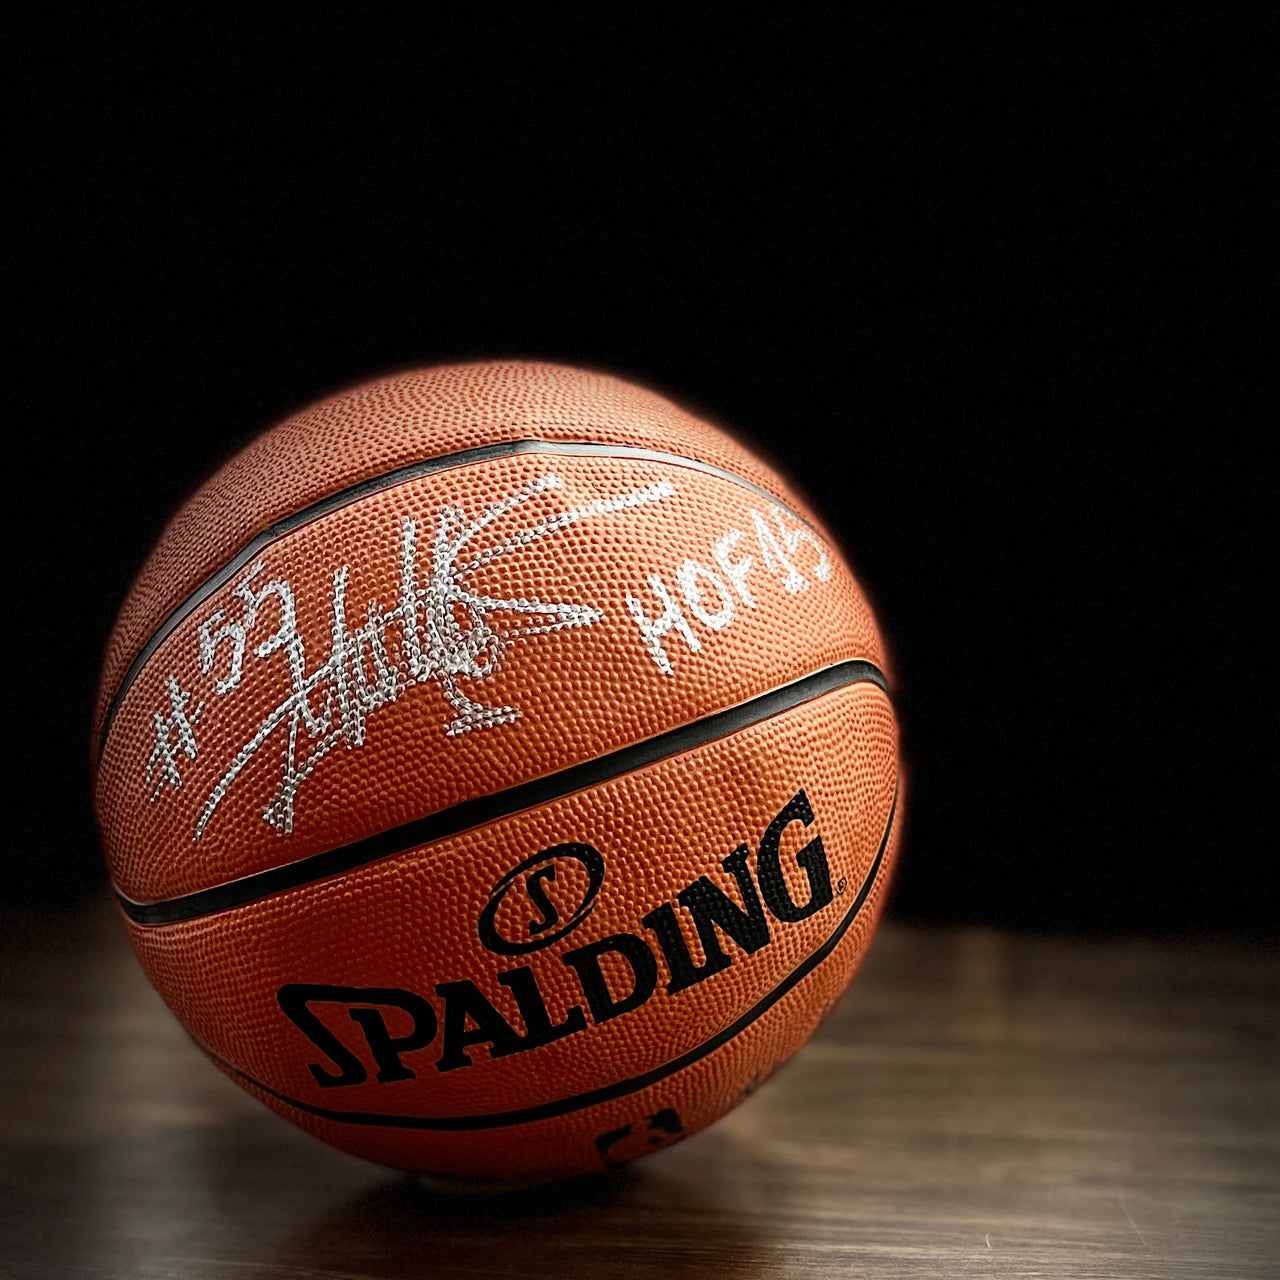 Dikembe Mutombo Autographed Spalding Basketball with Hall of Fame Inscription - Dynasty Sports & Framing 